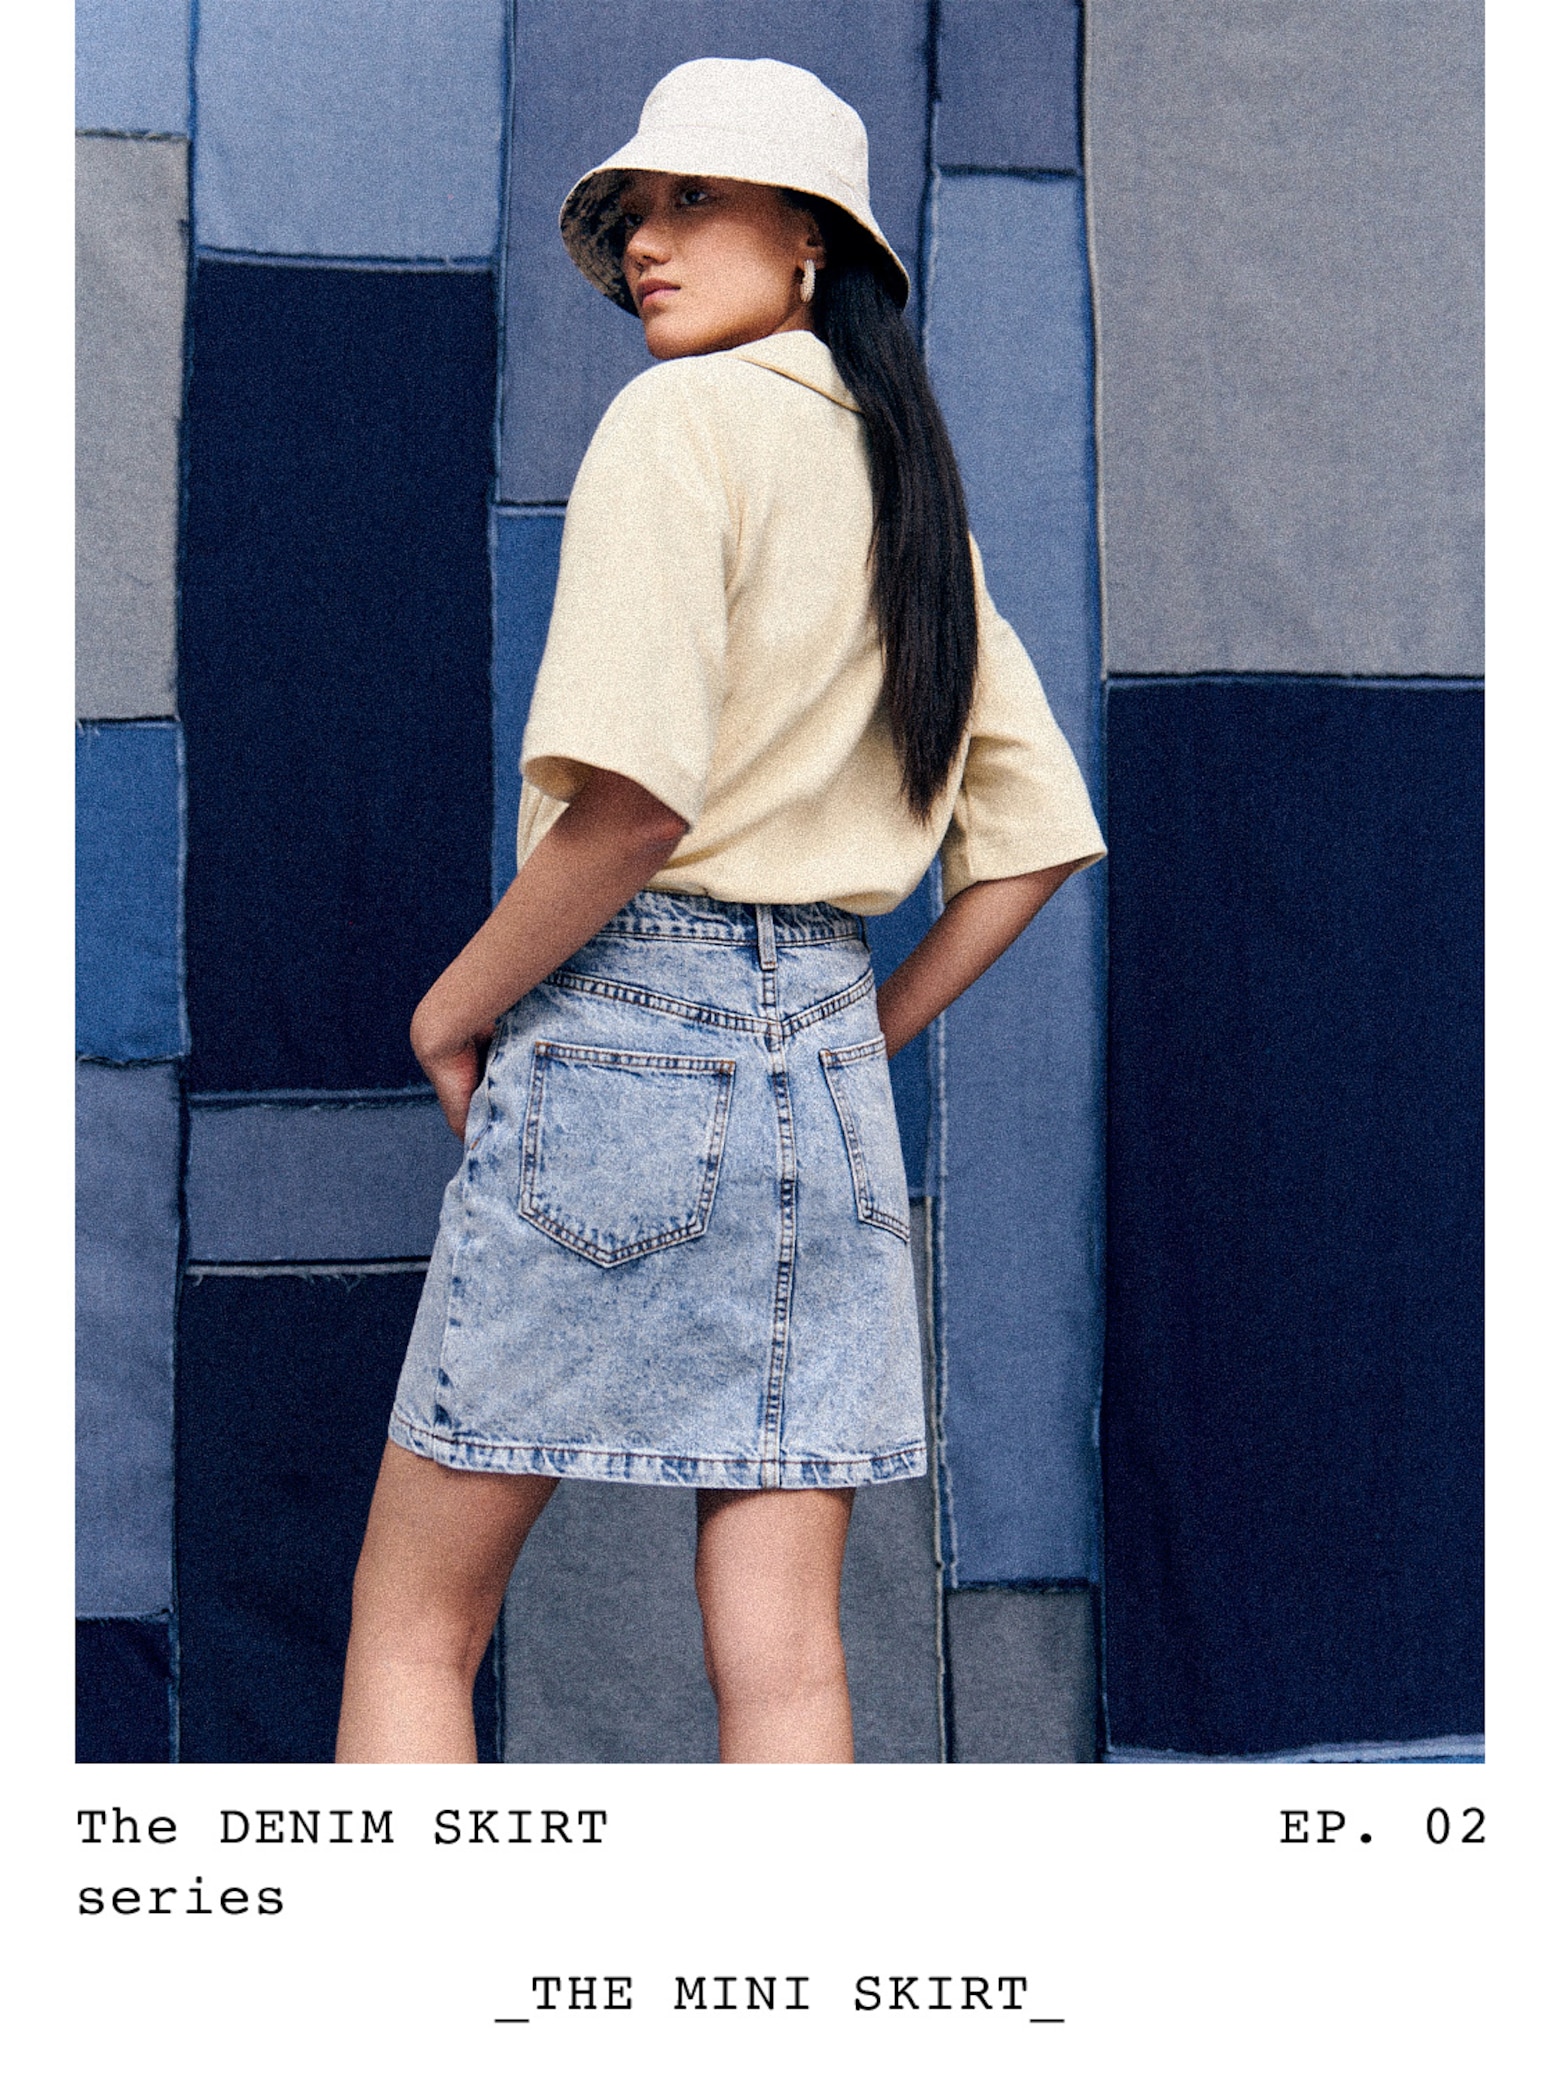 Give your jeans a break Denim skirts